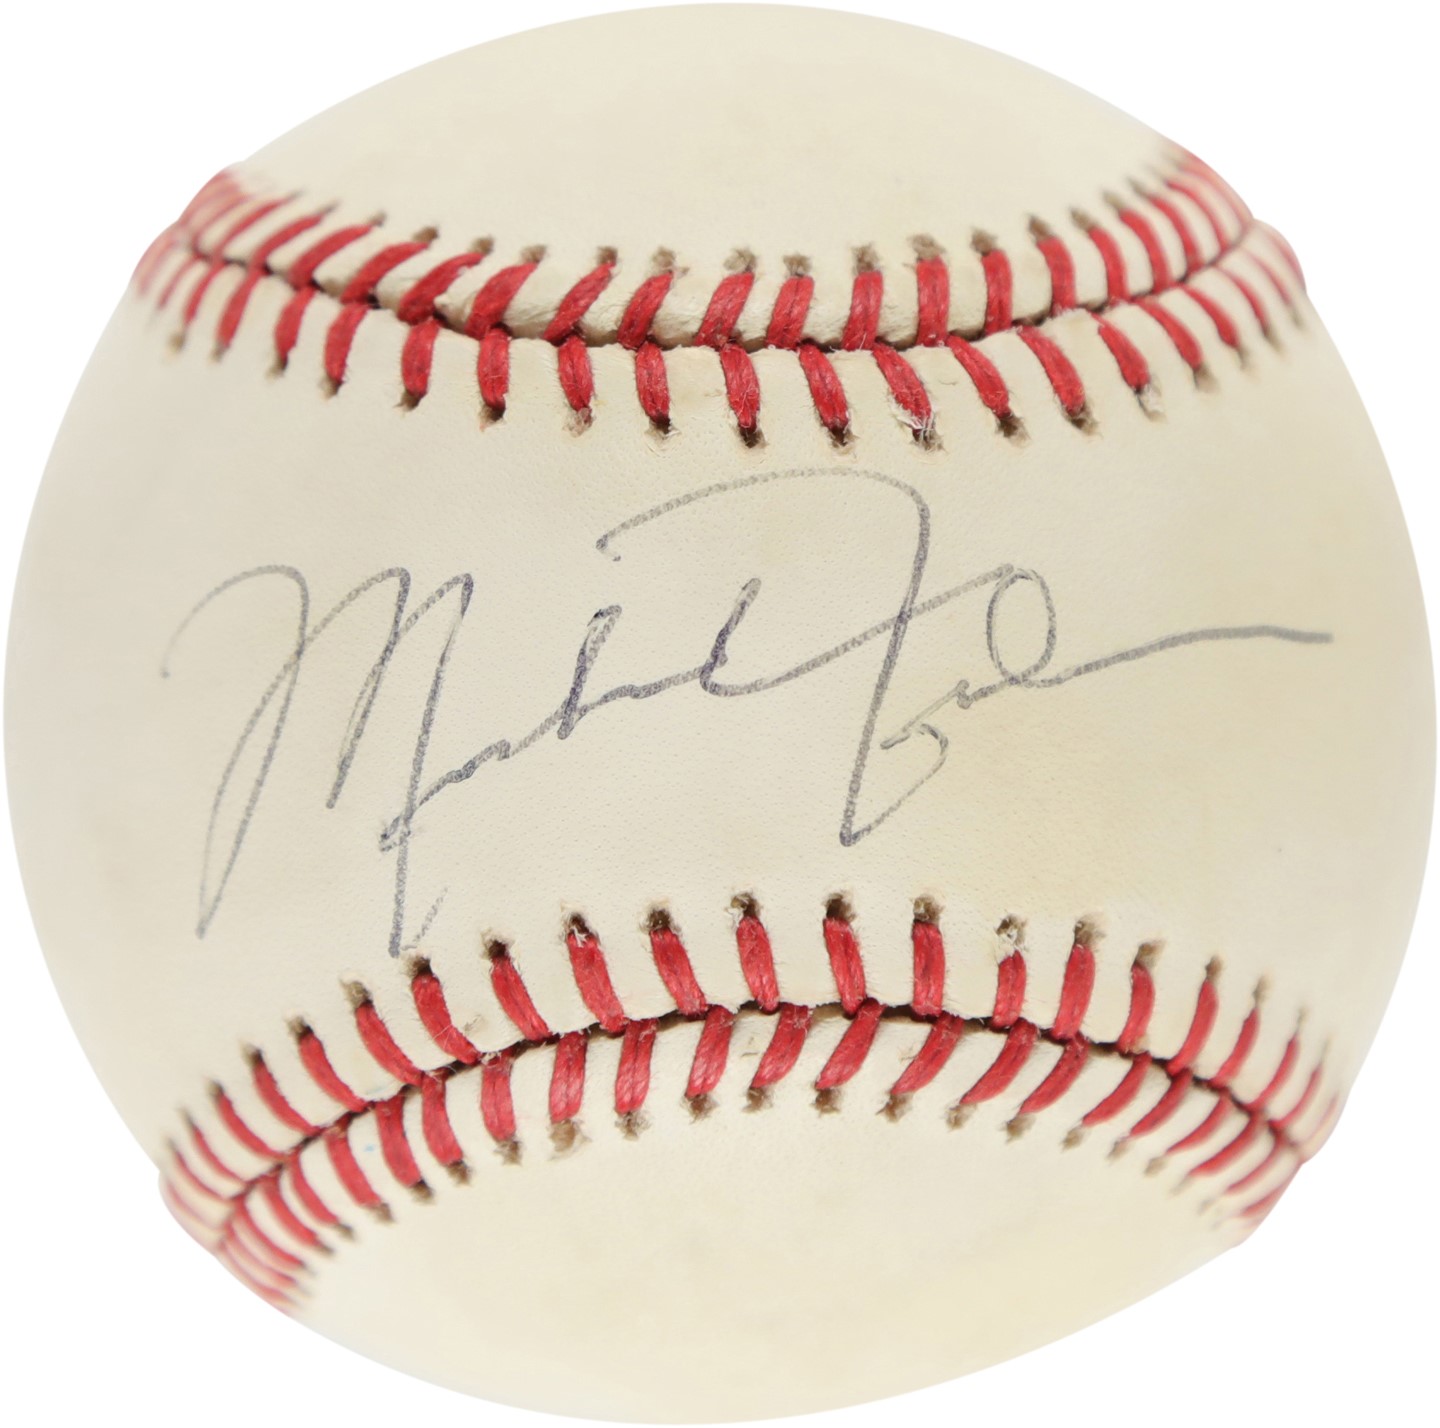 Baseball Autographs - Michael Jordan Single-Signed Baseball Obtained in Person by White Sox Scout (PSA)